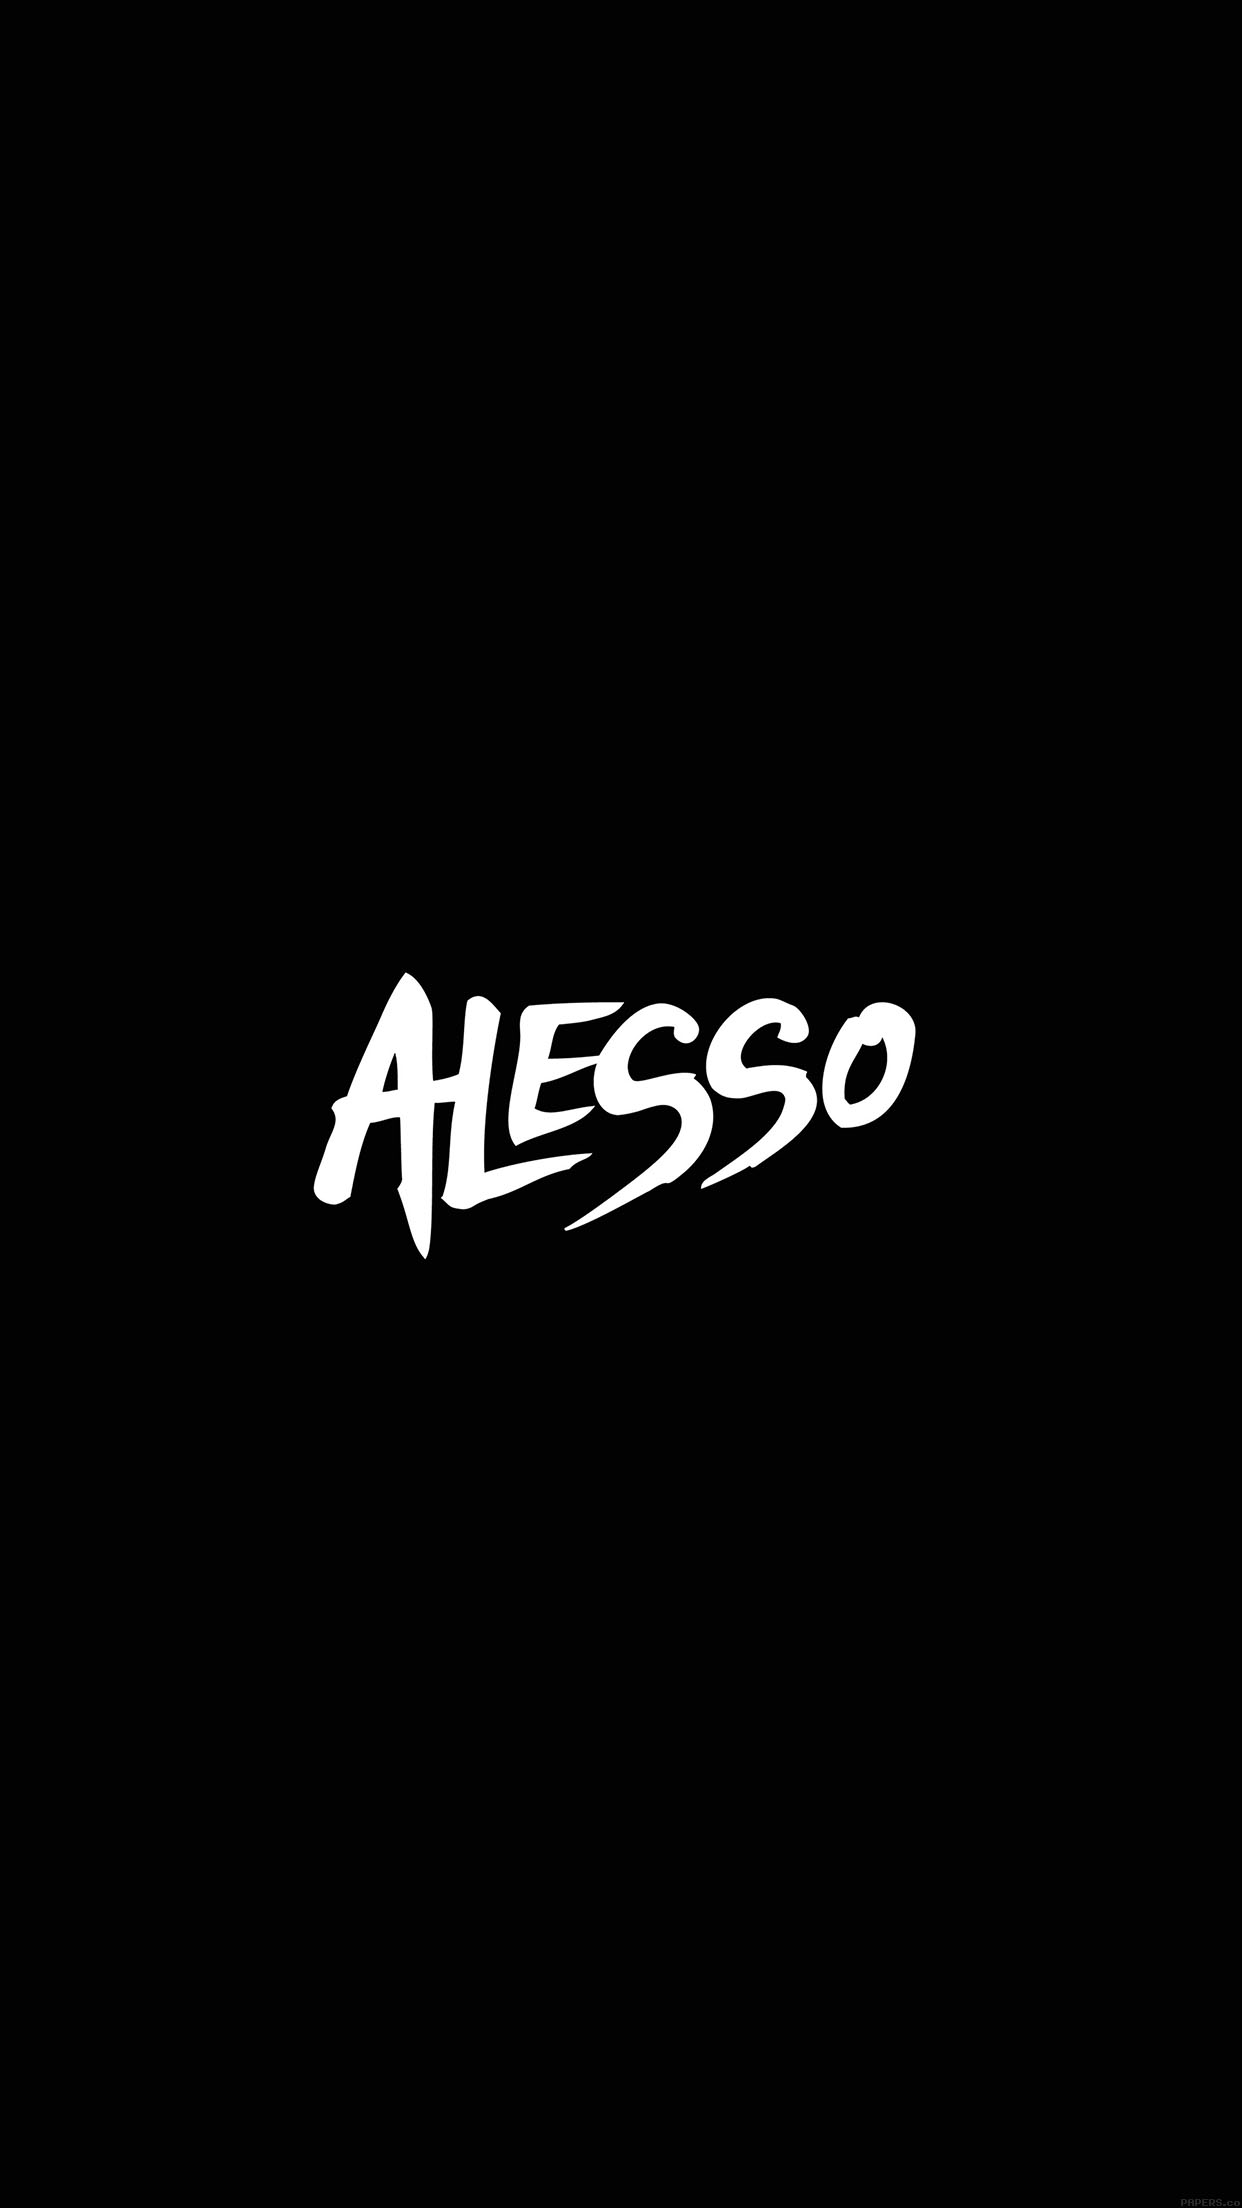 Wallpaper Alesso Logo Music Android wallpaper